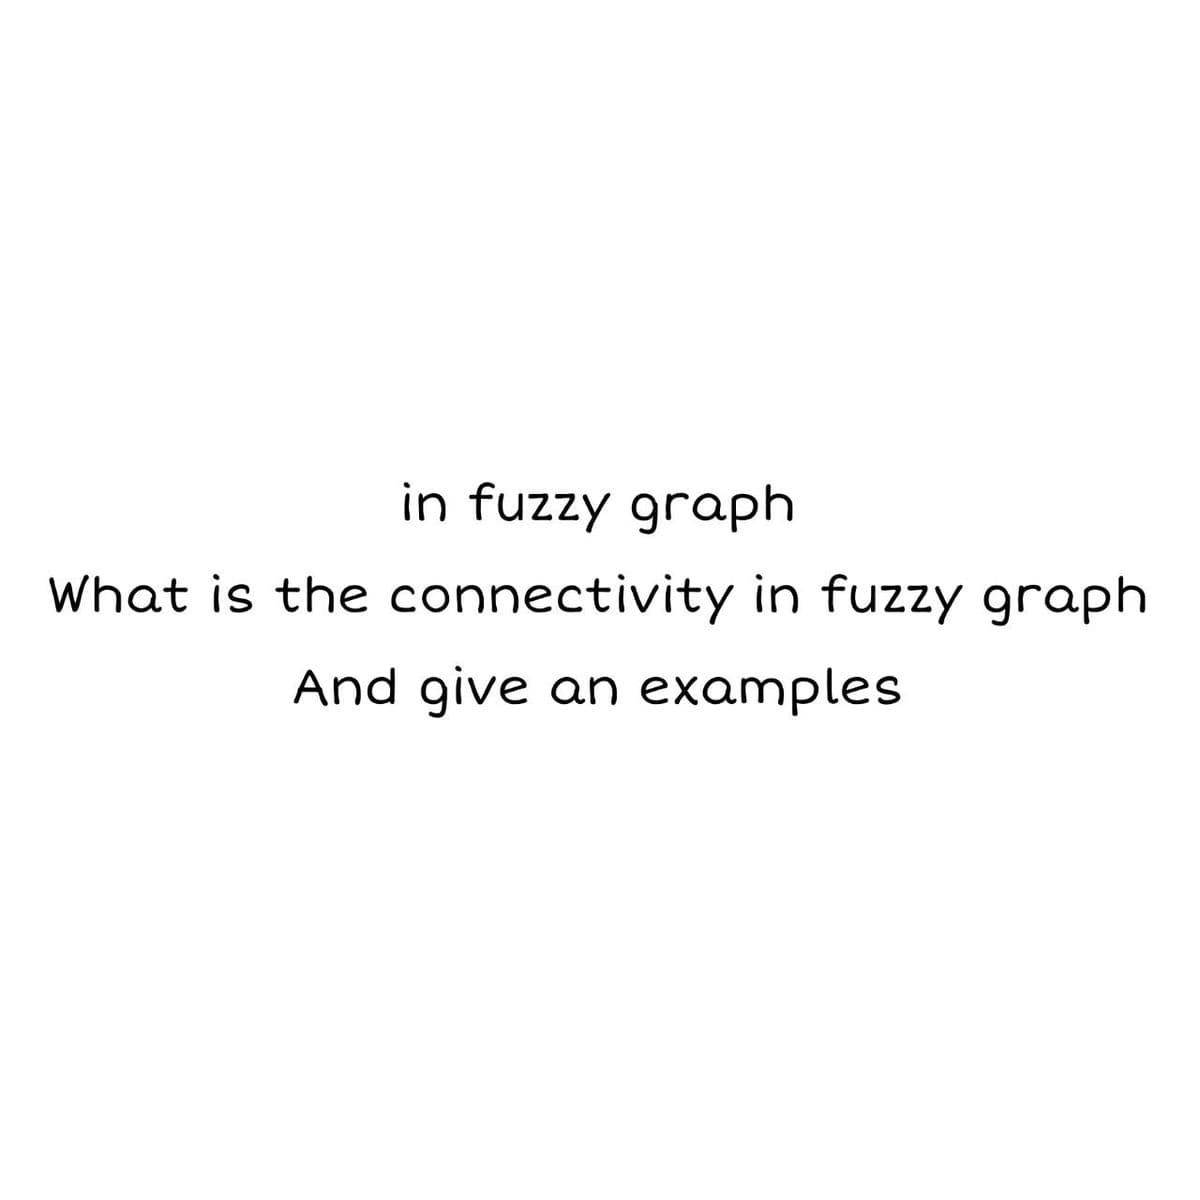 in fuzzy graph
What is the connectivity in fuzzy graph
And give an examples